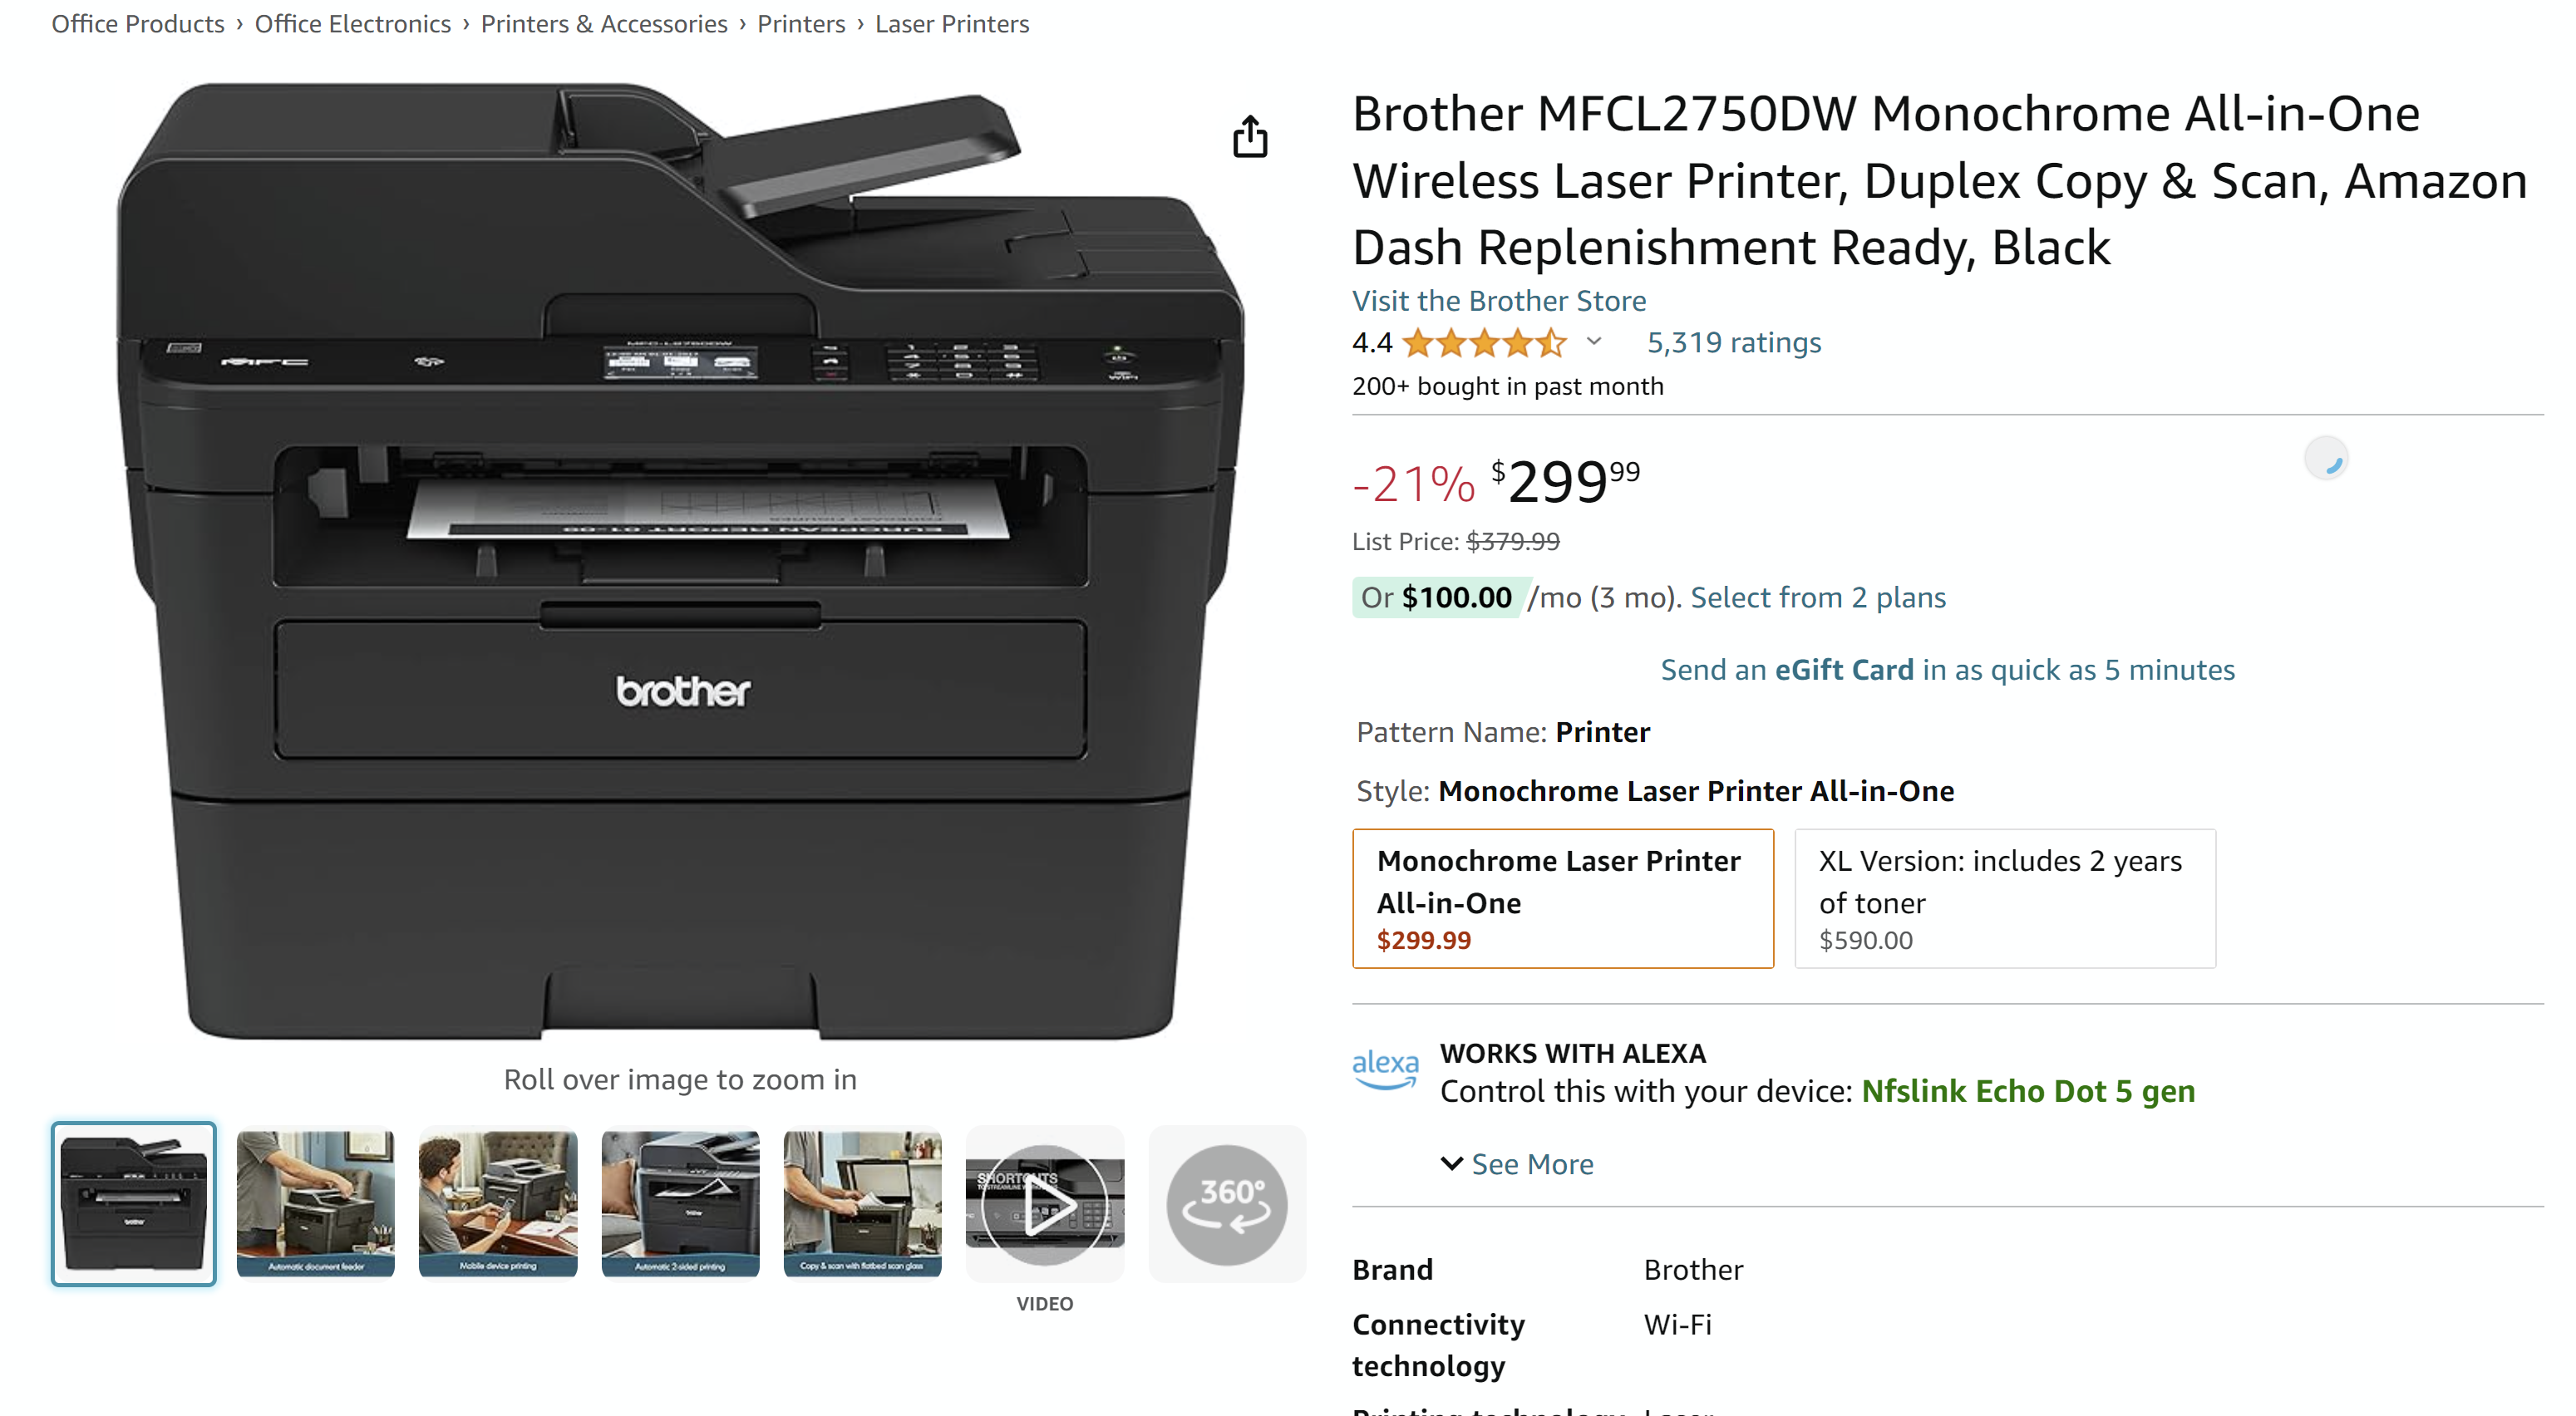 Brother MFCL2750DW Monochrome All-in-One Wireless Laser Printer, Duplex Copy &amp; Scan, Amazon Dash Replenishment Ready, Black : Amazon.ca: Office Products